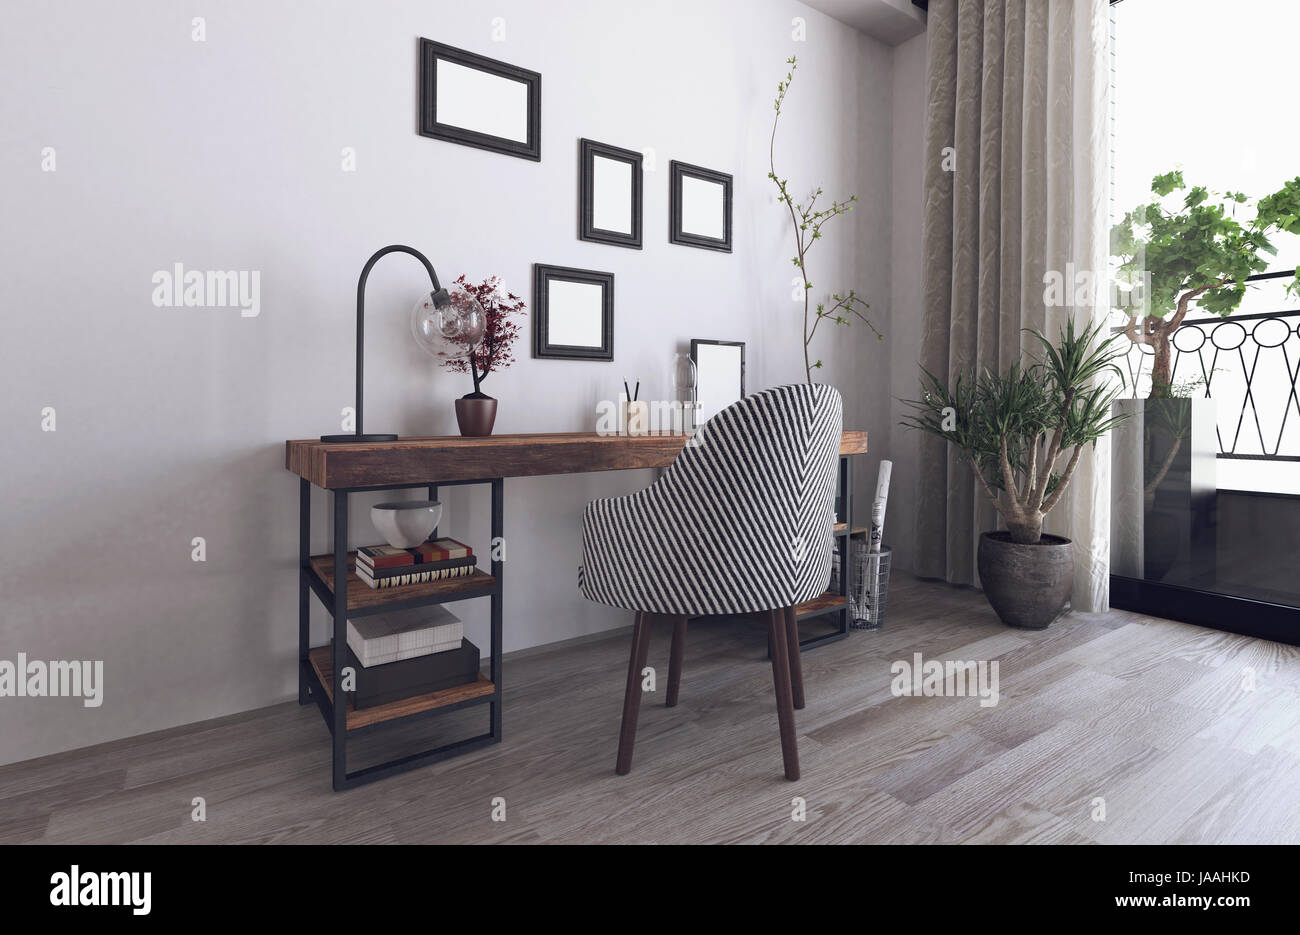 Scandinavian Hipster Style Interior With Wooden Desk 3d